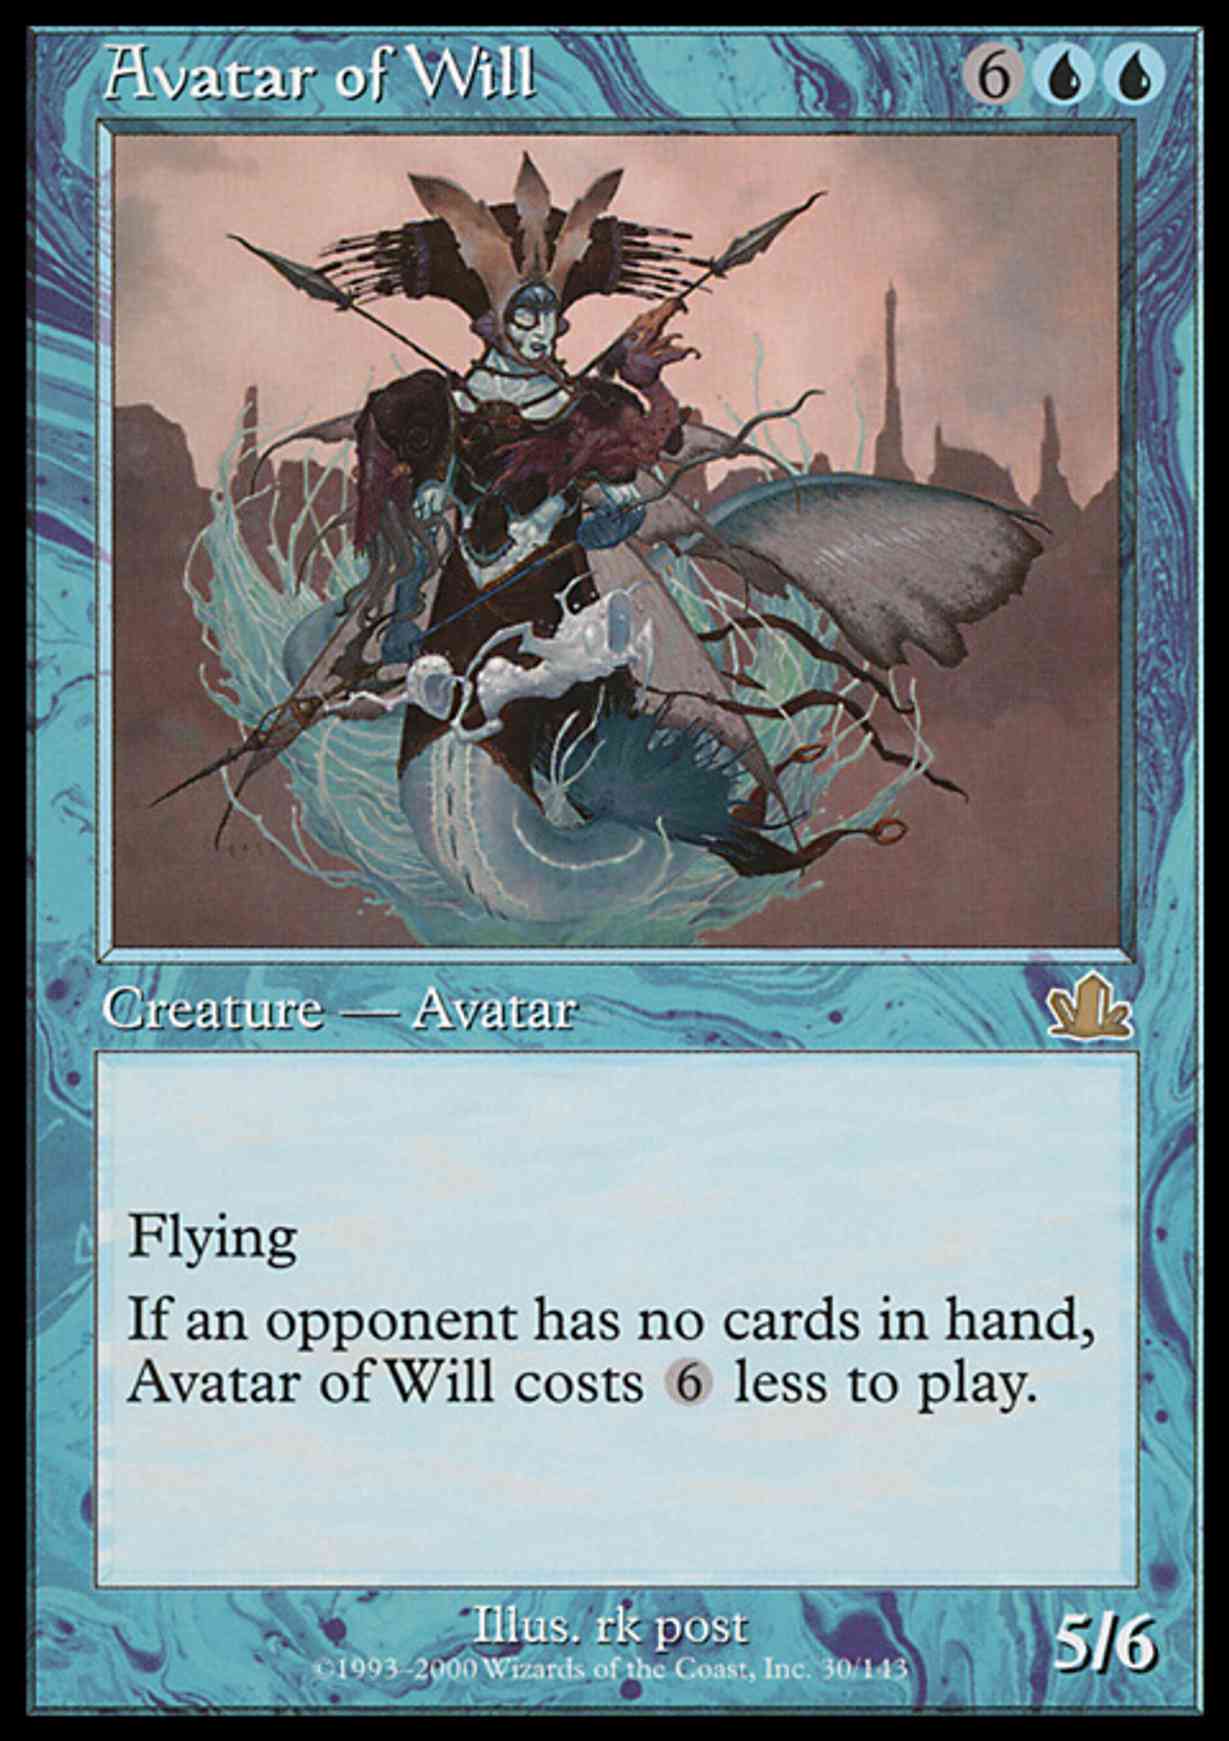 Avatar of Will magic card front